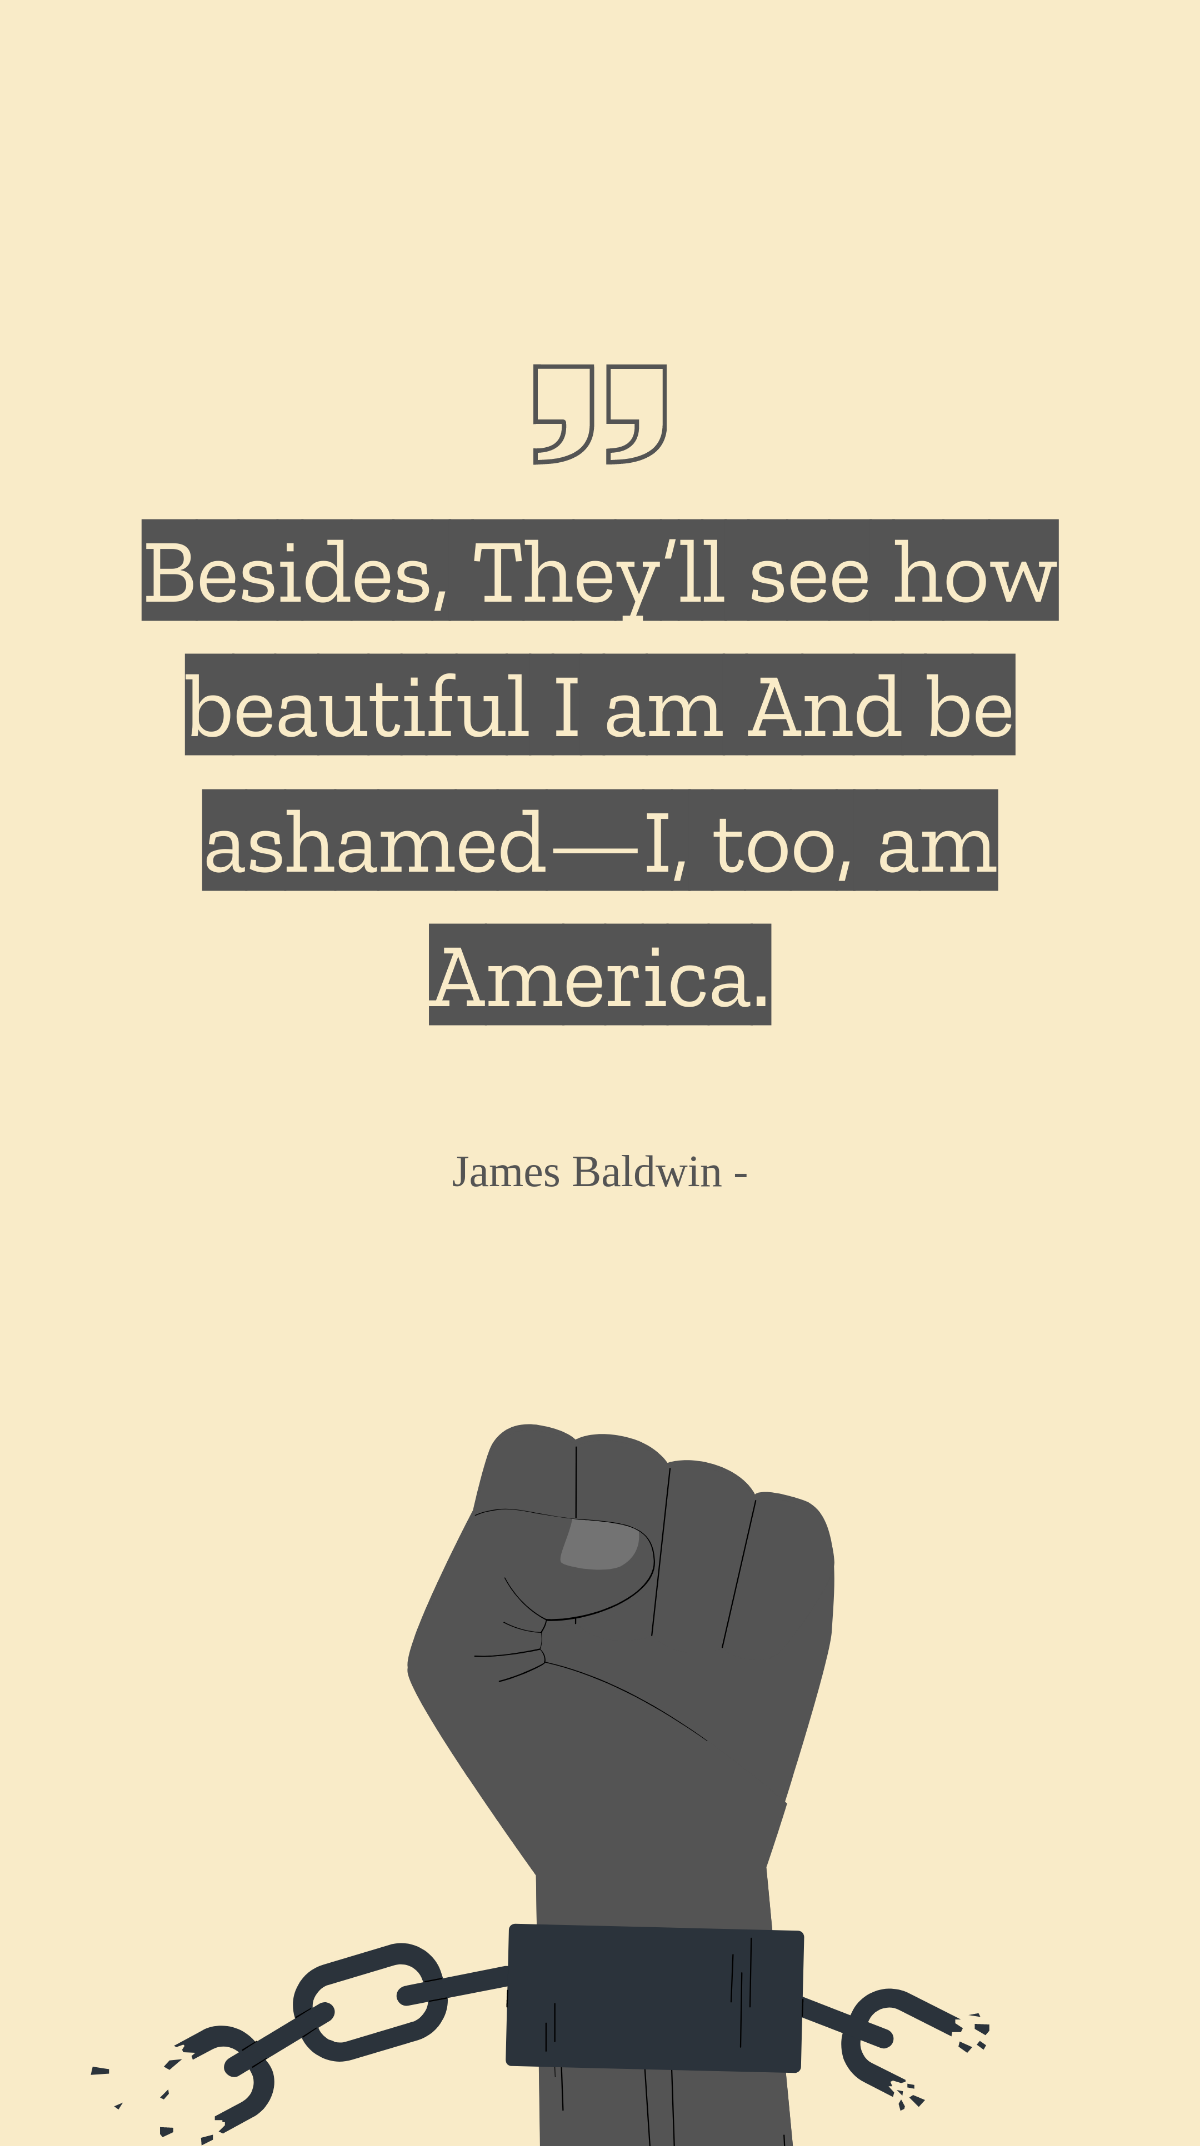 James Baldwin - Besides, They’ll see how beautiful I am And be ashamed—I, too, am America. Template